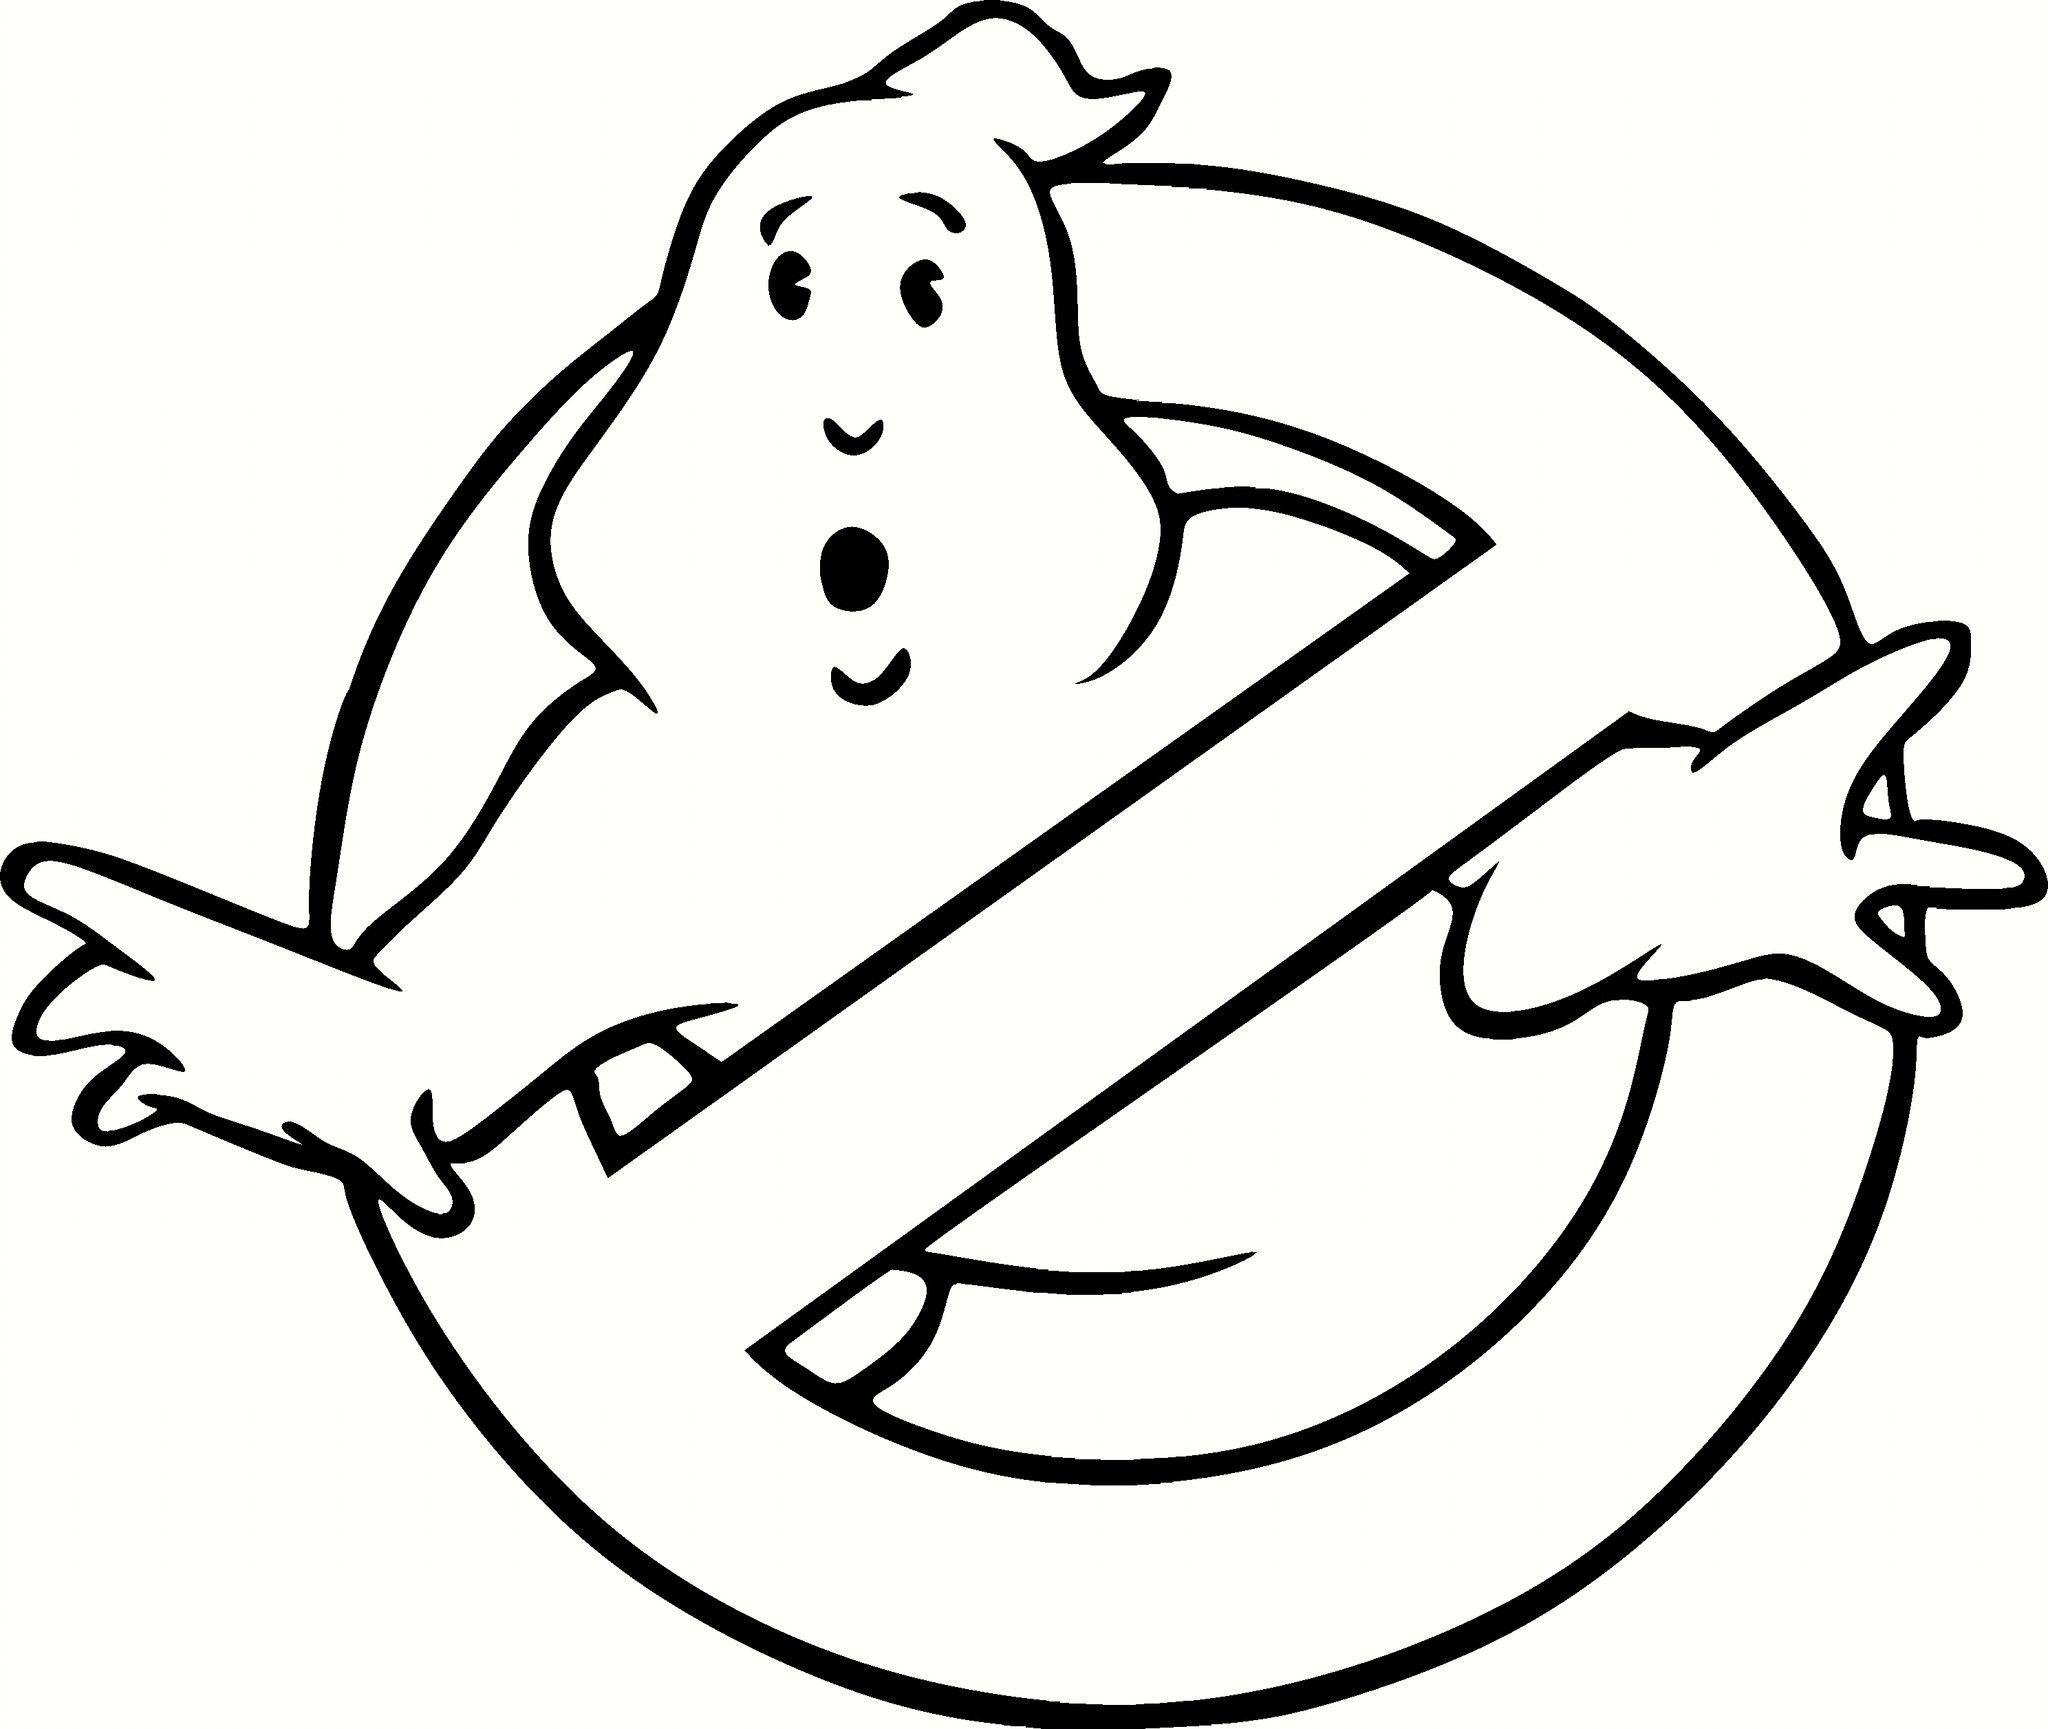 Printable Ghostbusters Coloring Pages Pdf - Free Ghostbusters Coloring Pages